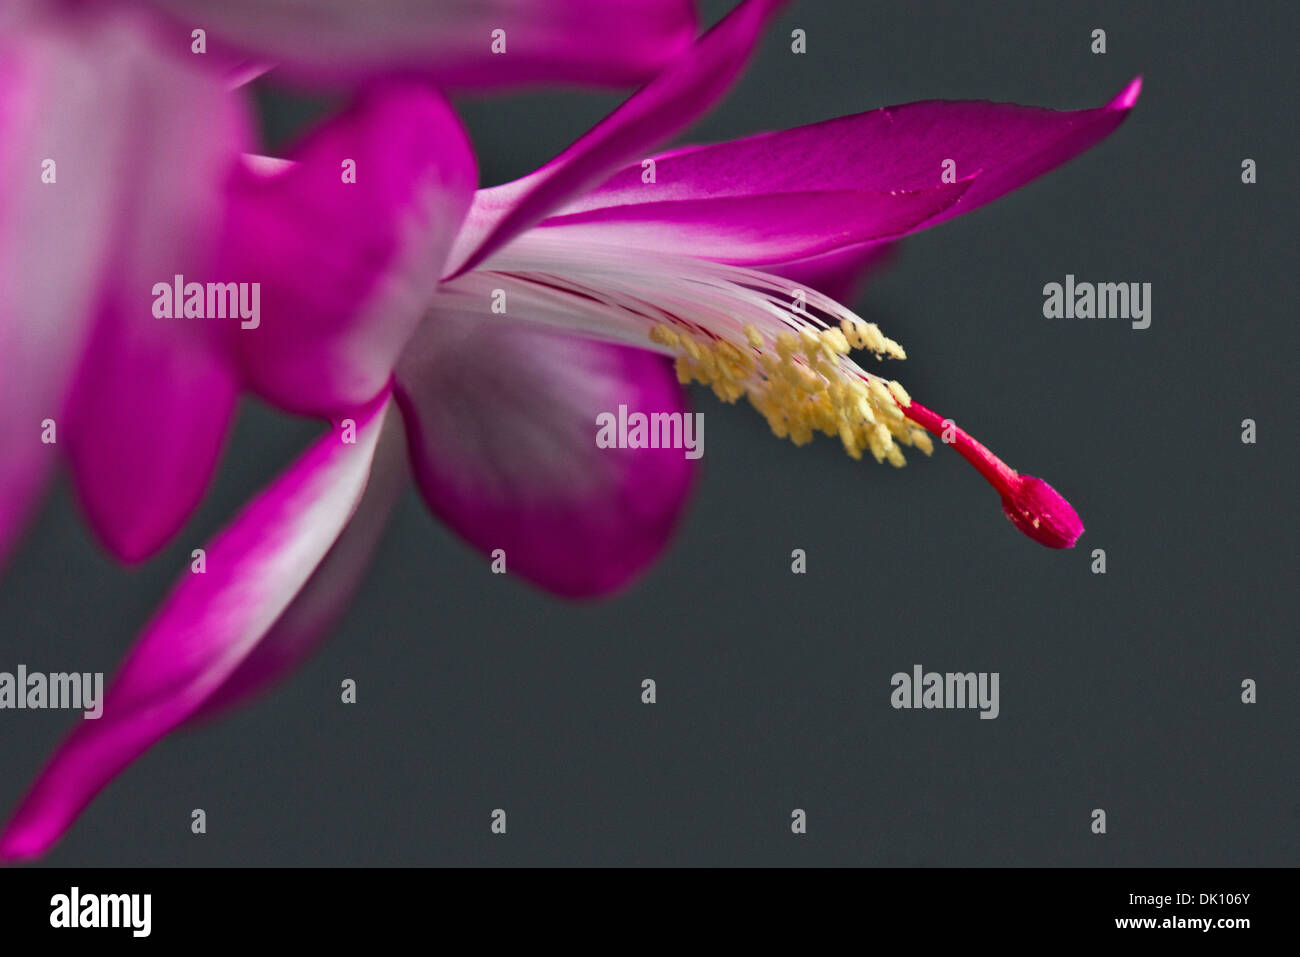 A close up image of a flower from a Christmas Cactus Stock Photo